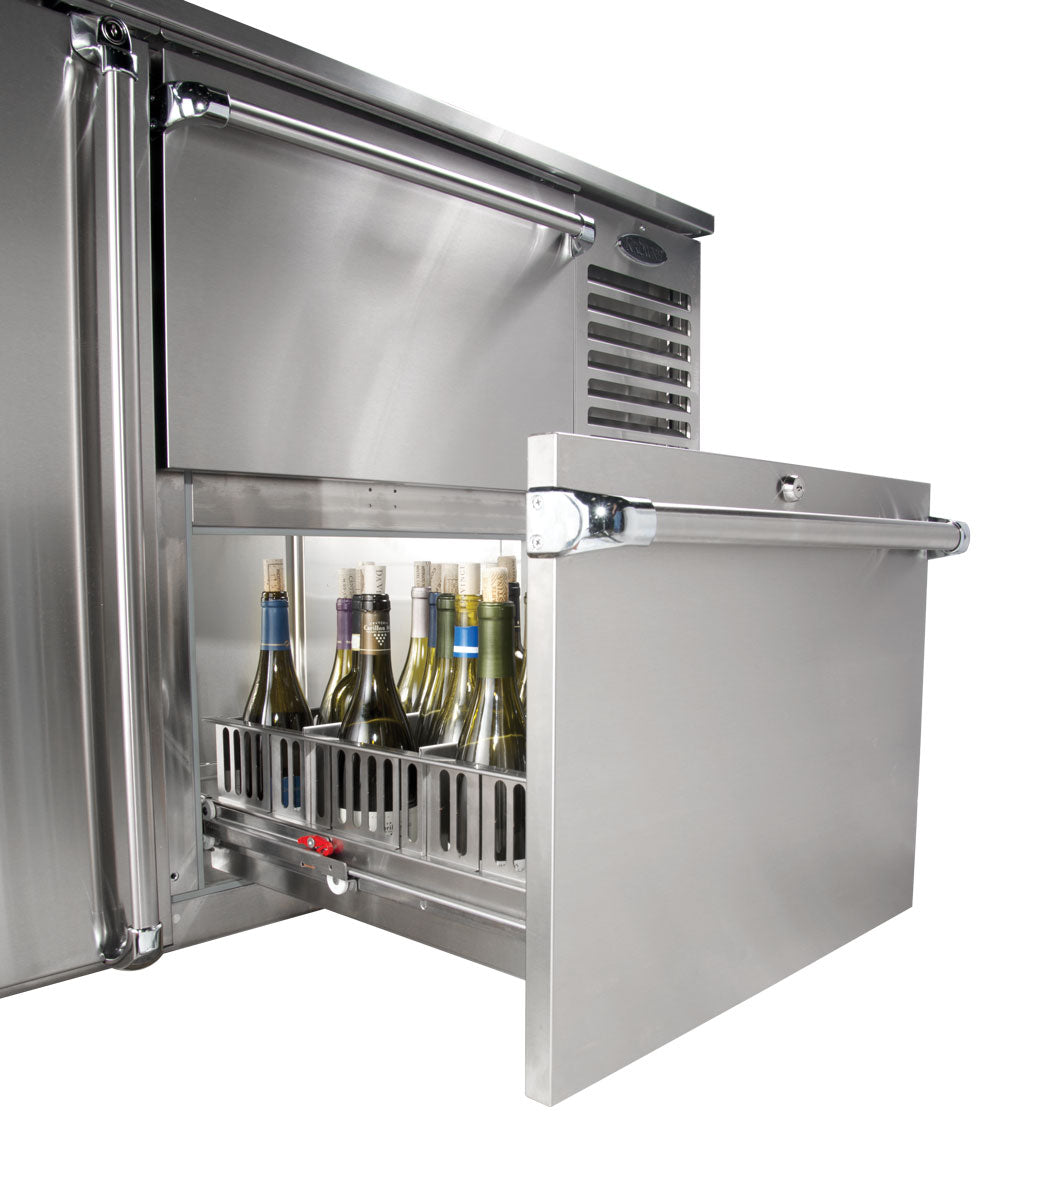 Krowne | 60" Wide 1 Door/2 Drawer Self Contained Stainless Steel Reach-In Back Bar